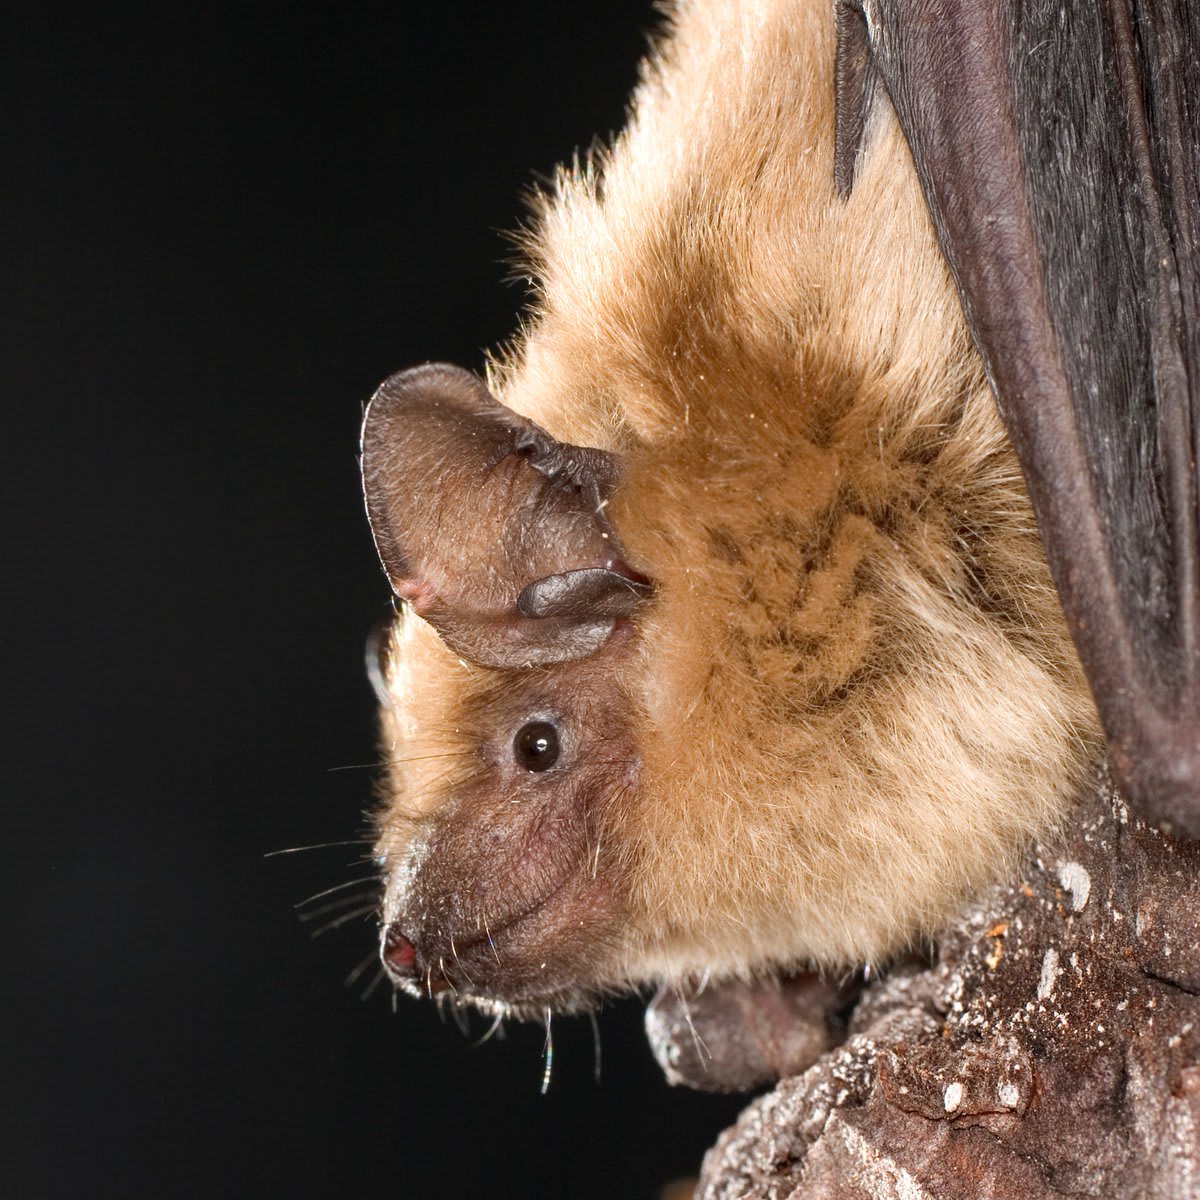 Researchers have finally found a weakness in "the Destroyer"—a fungus that's killed millions of bats since it emerged in '06. But can they exploit it? @bioGraphic on new breakthroughs in a fight that once seemed unwinnable: https://t.co/aonujkARdl. /